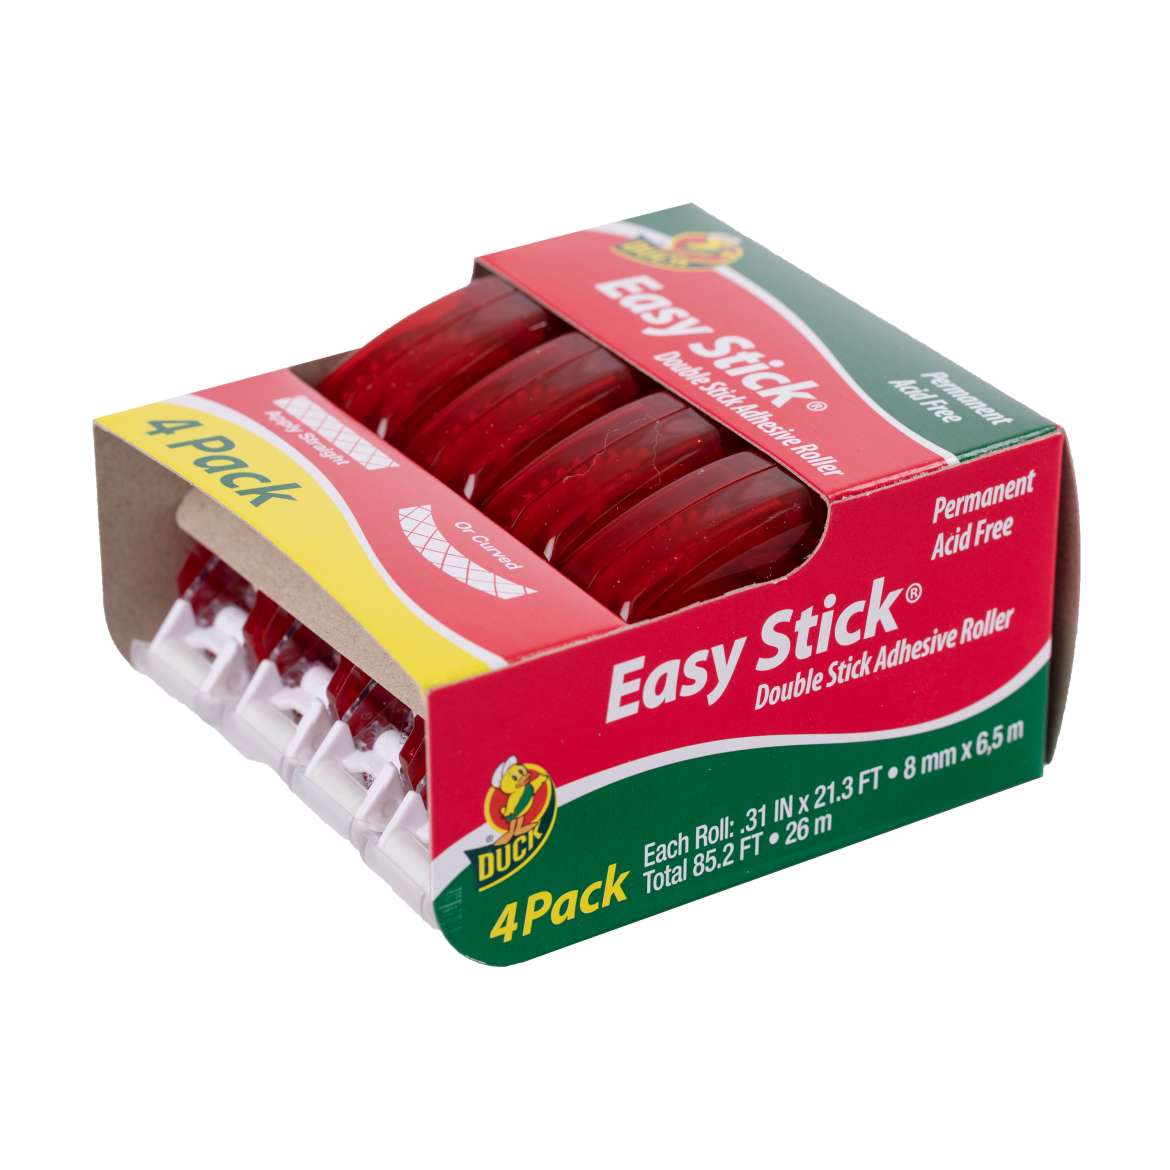 Easy Stick® Adhesive Rollers Image